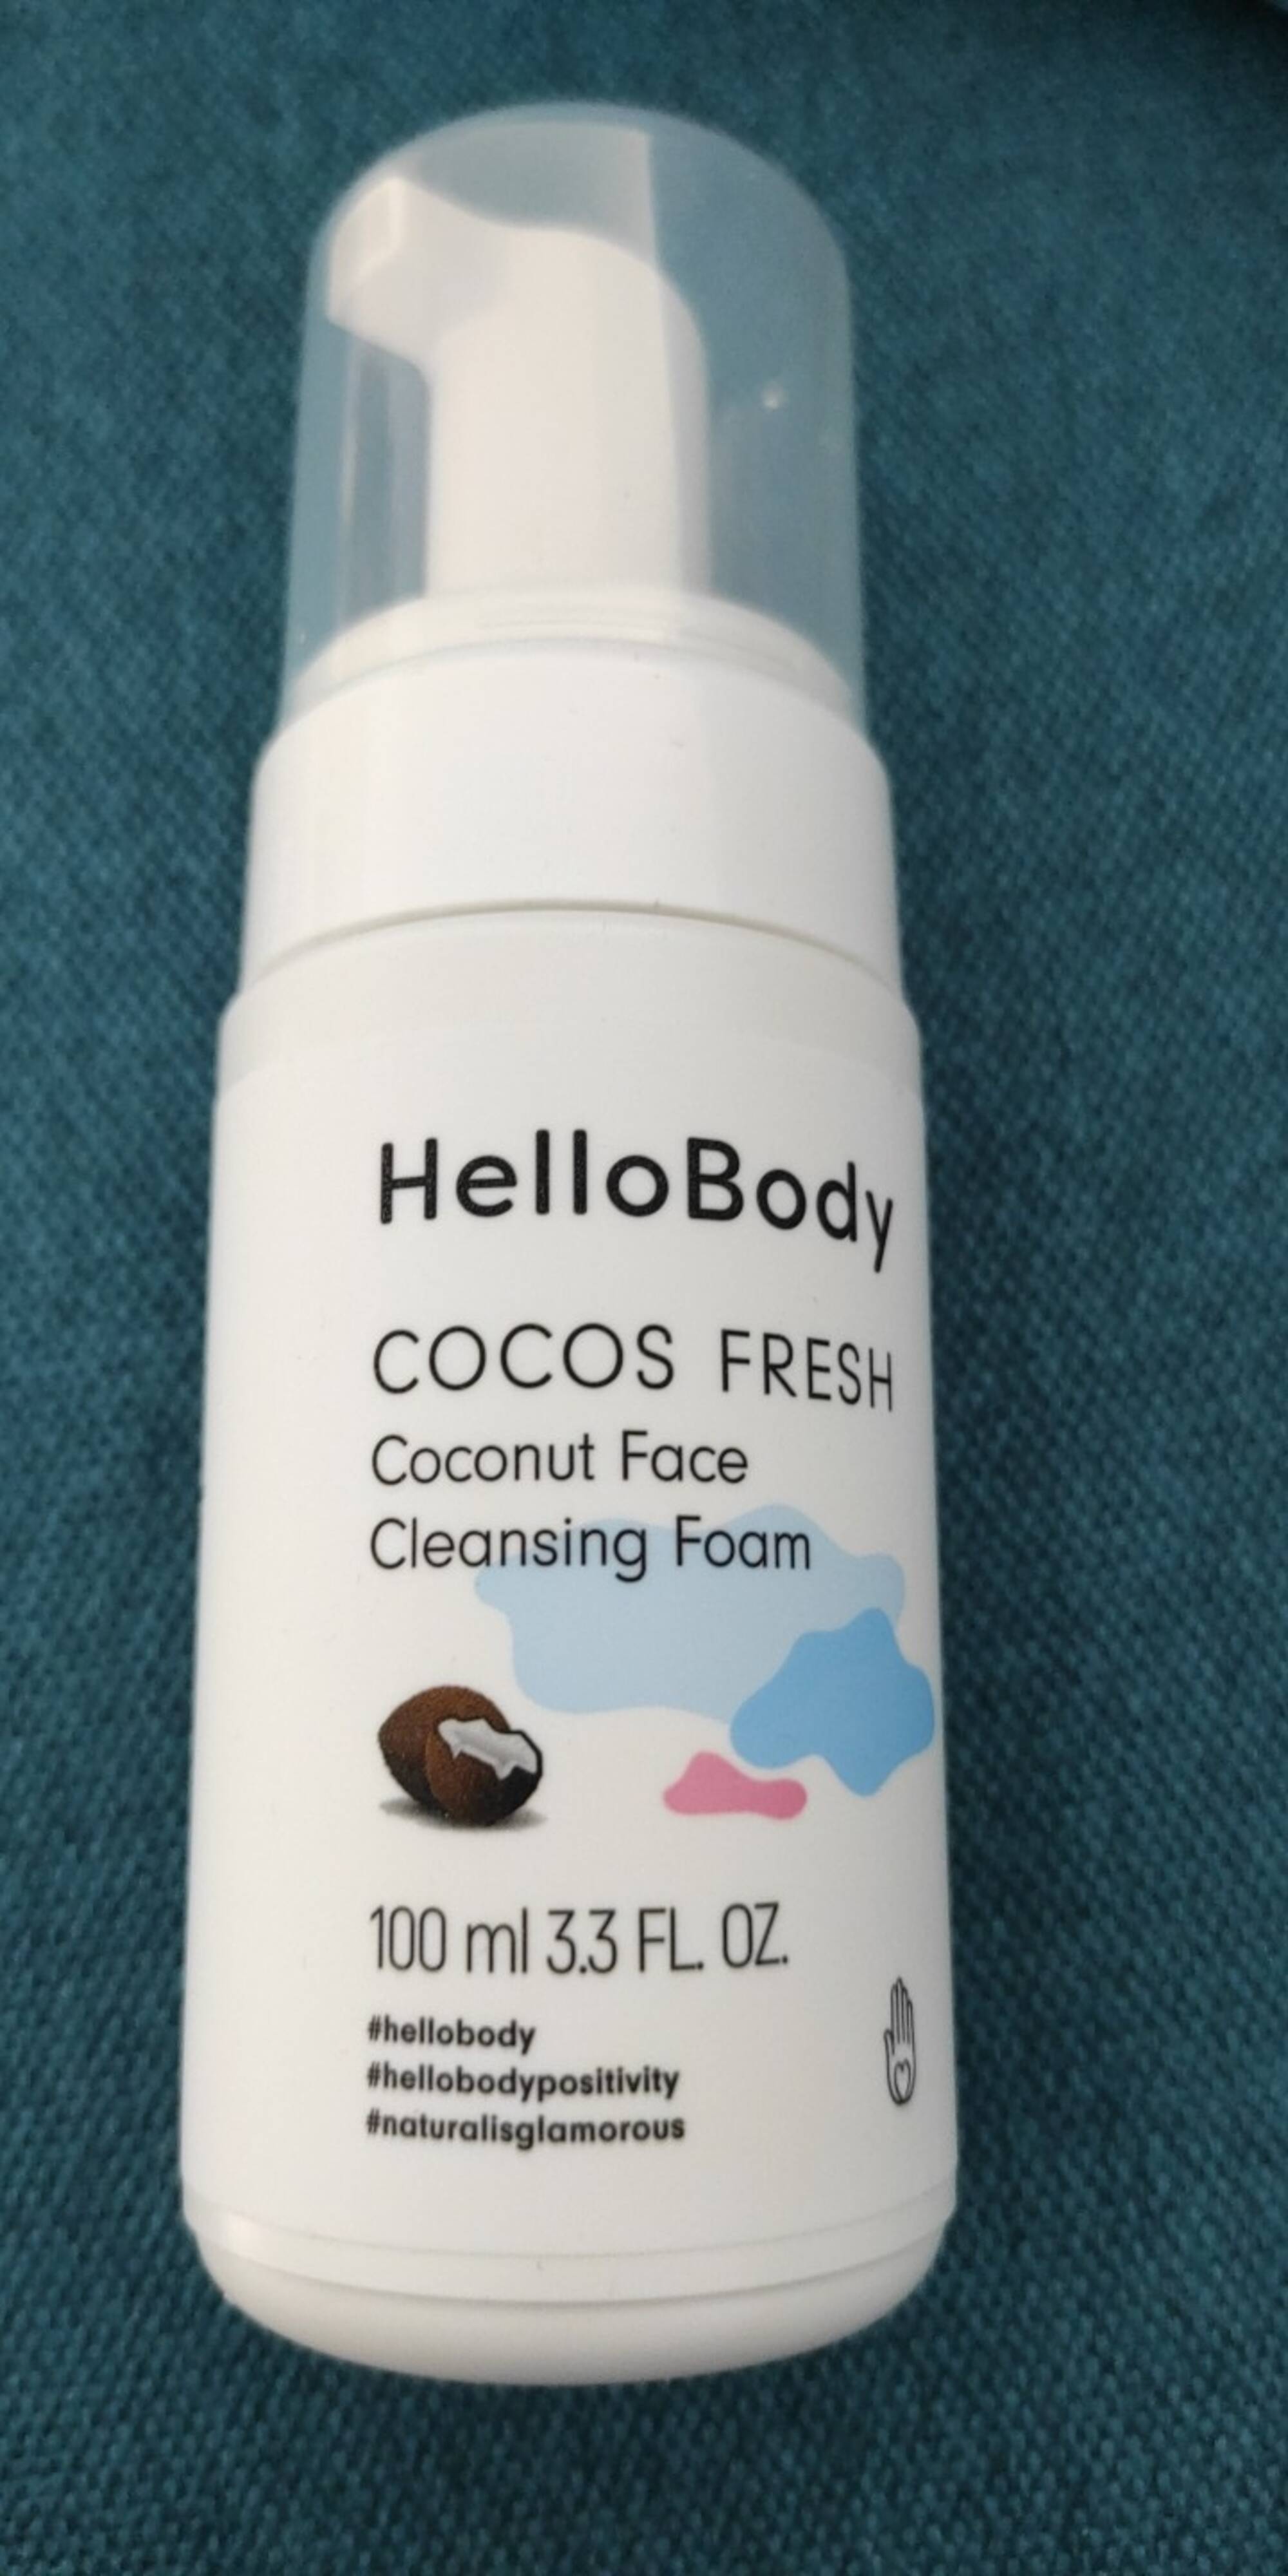 HELLOBODY - Cocos fresh - Coconut face cleansing foam